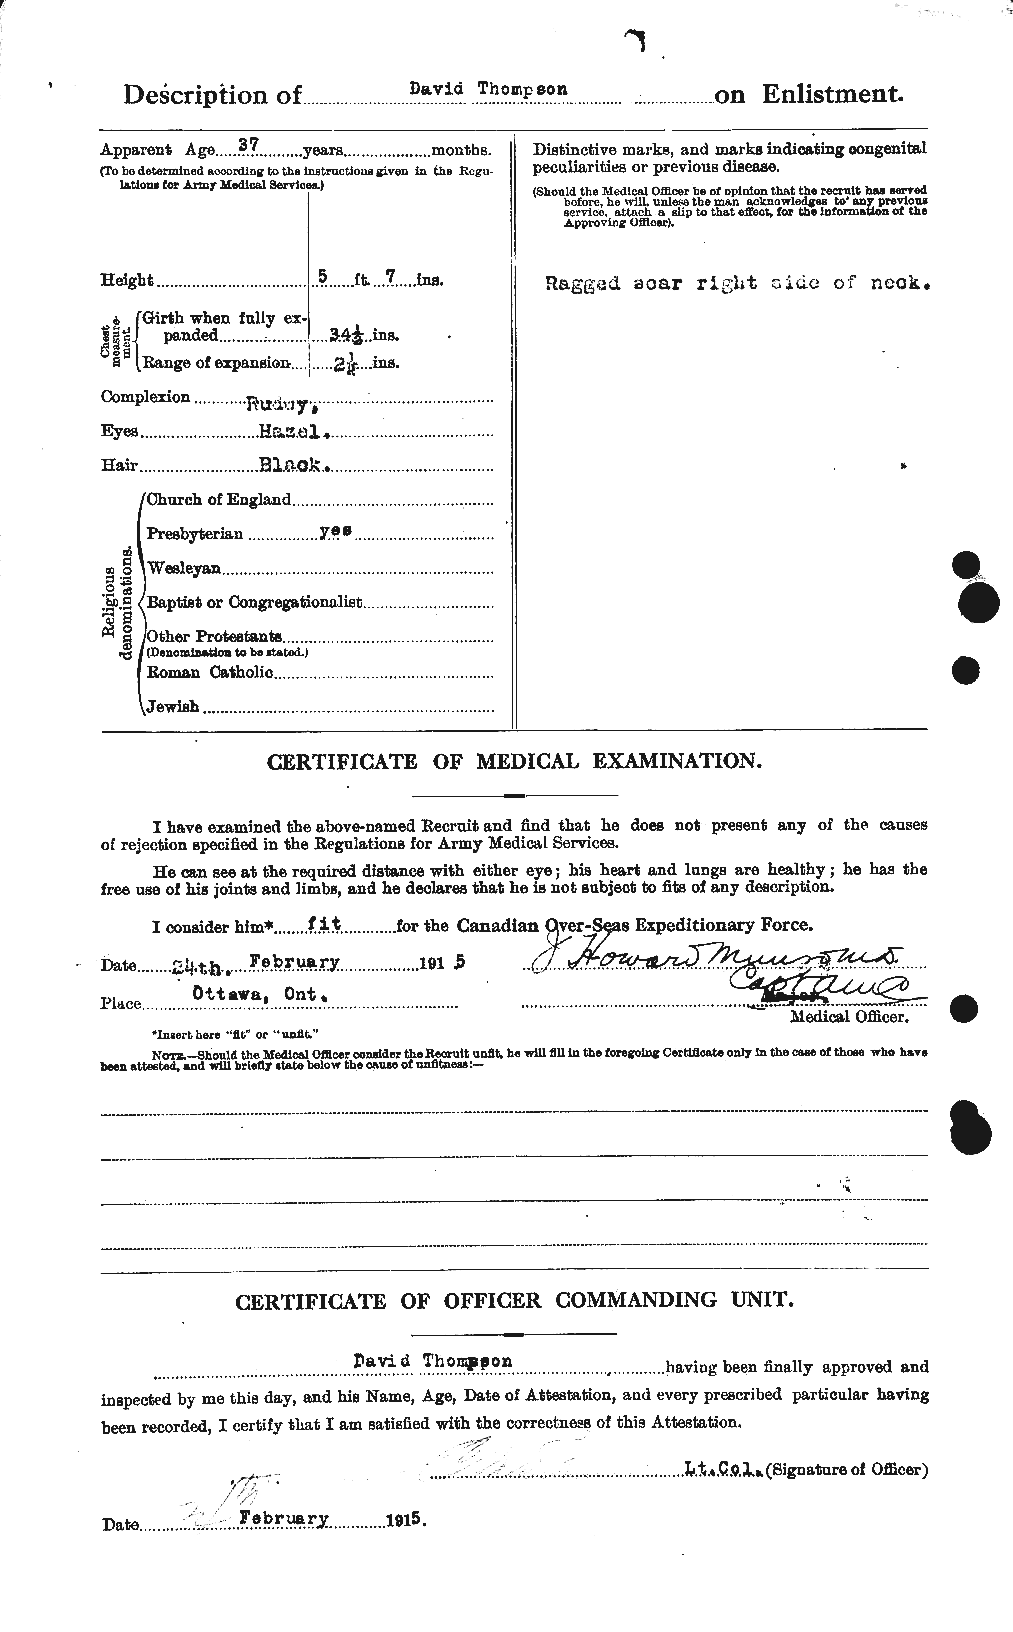 Personnel Records of the First World War - CEF 630498b